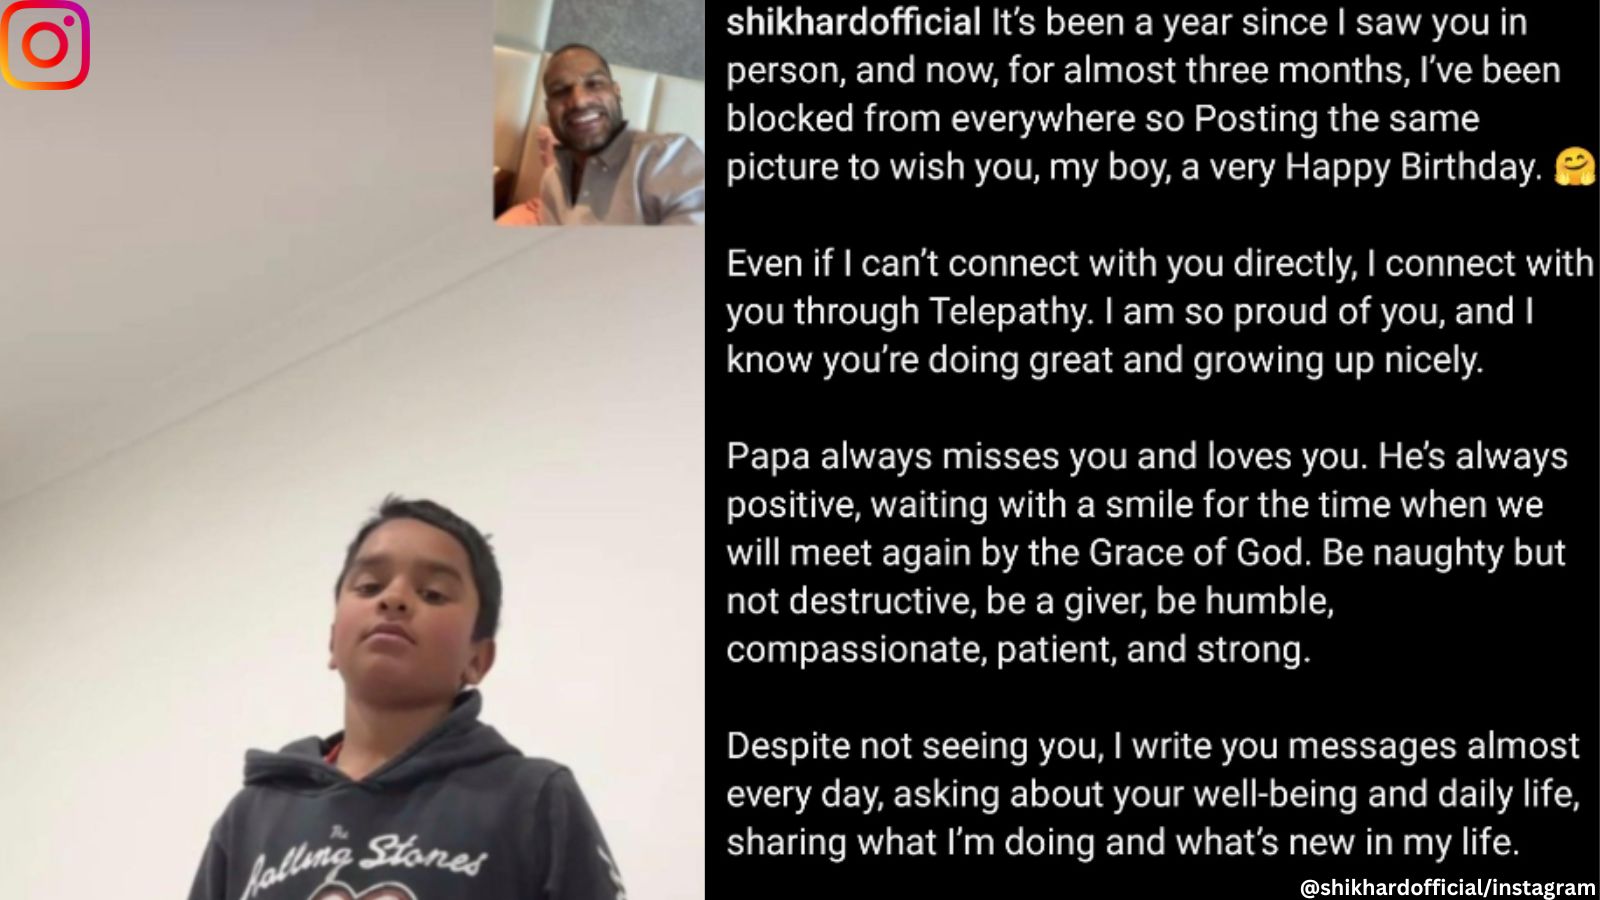 Shikhar Dhawan sends birthday wishes to his son in a heartfelt